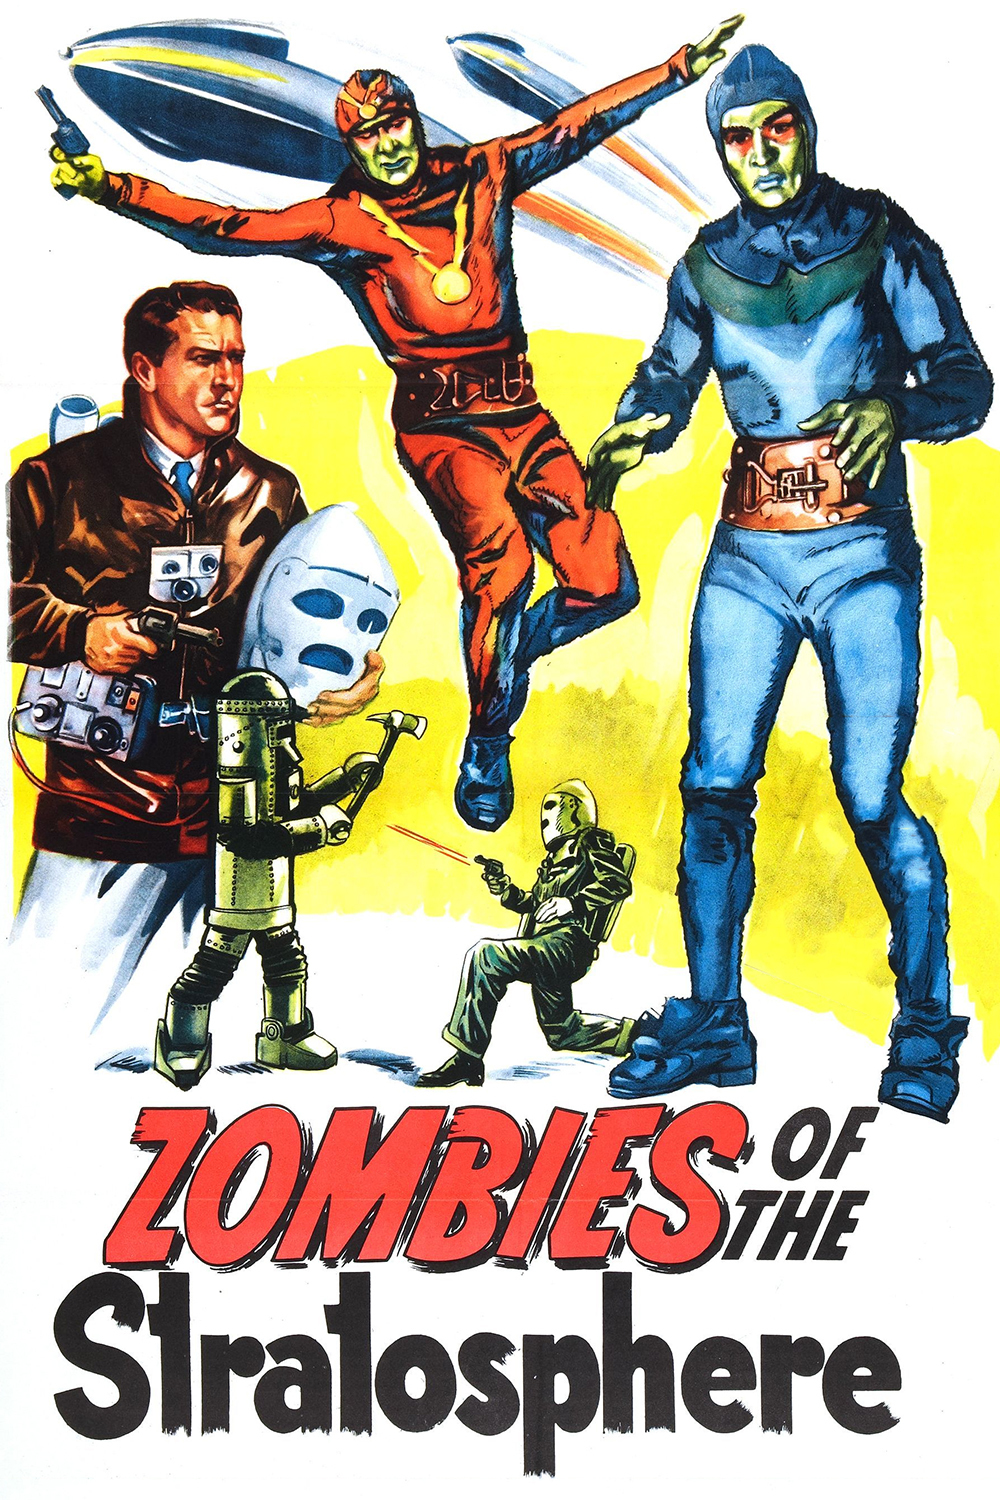 affiche du film Zombies of the Stratosphere